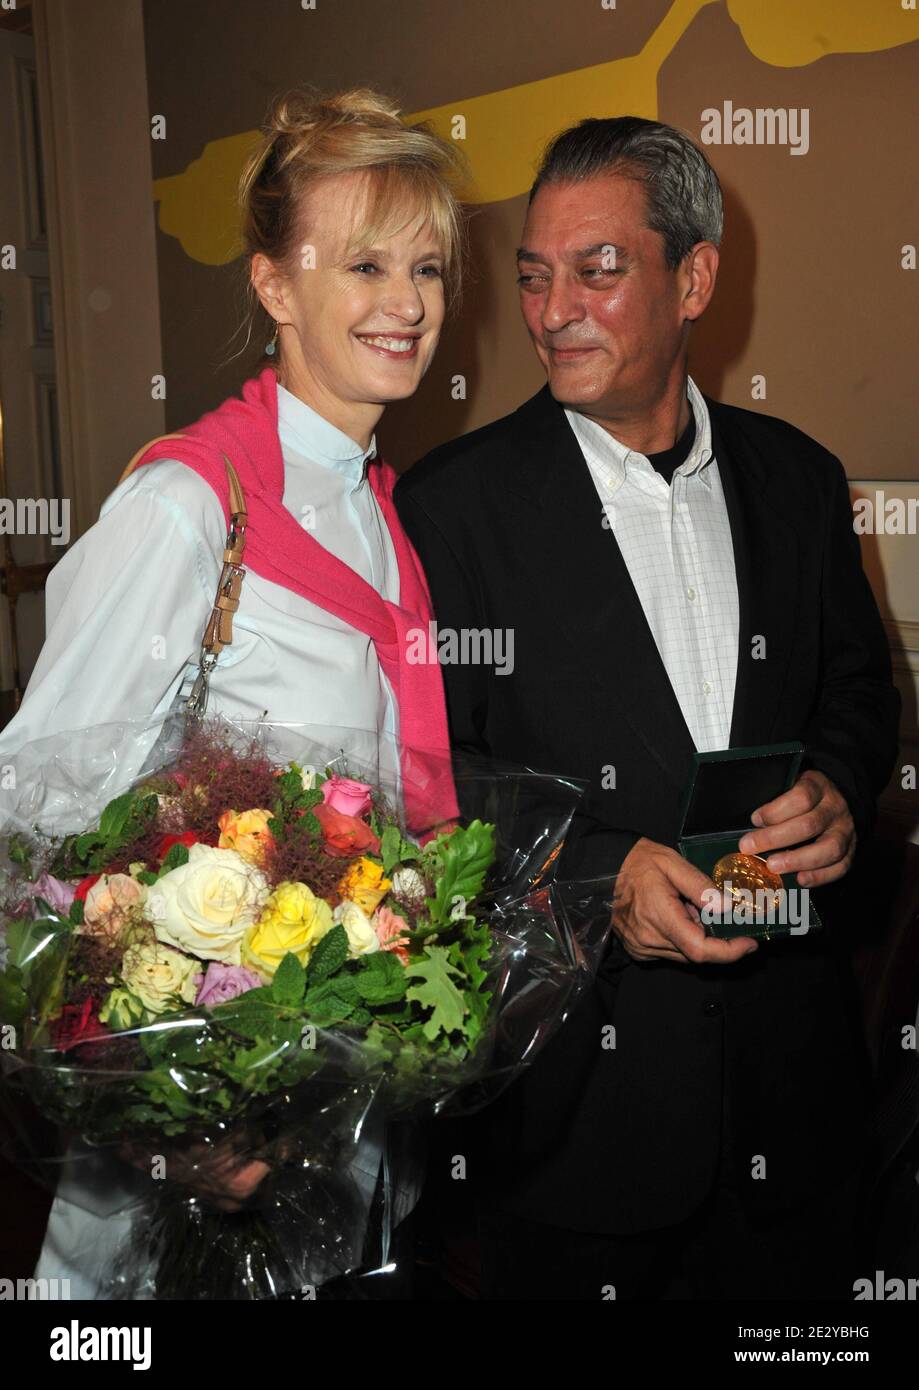 US novelist Paul Auster and his wife Siri Hustvedt during an award ceremony  after he received the 'Grand Vermeil' medal from the mayor of Paris  Bertrand Delanoe, on June 10, 2010 in